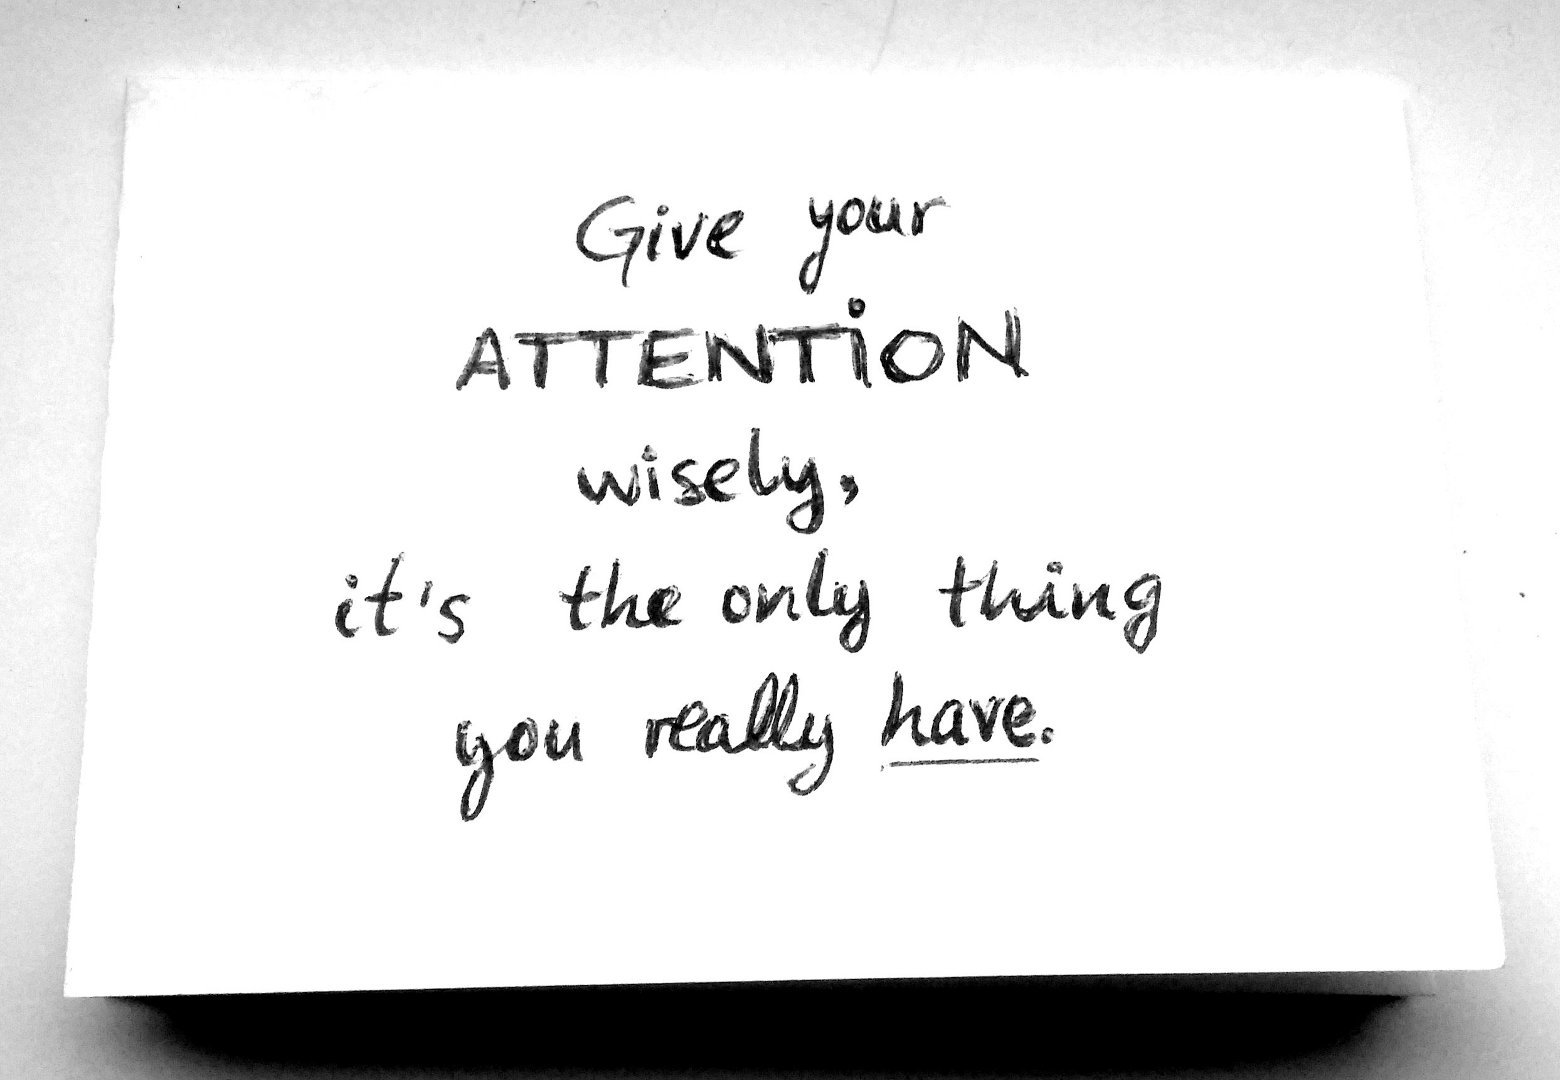 Give your attention wisely, it's the only thing you really have